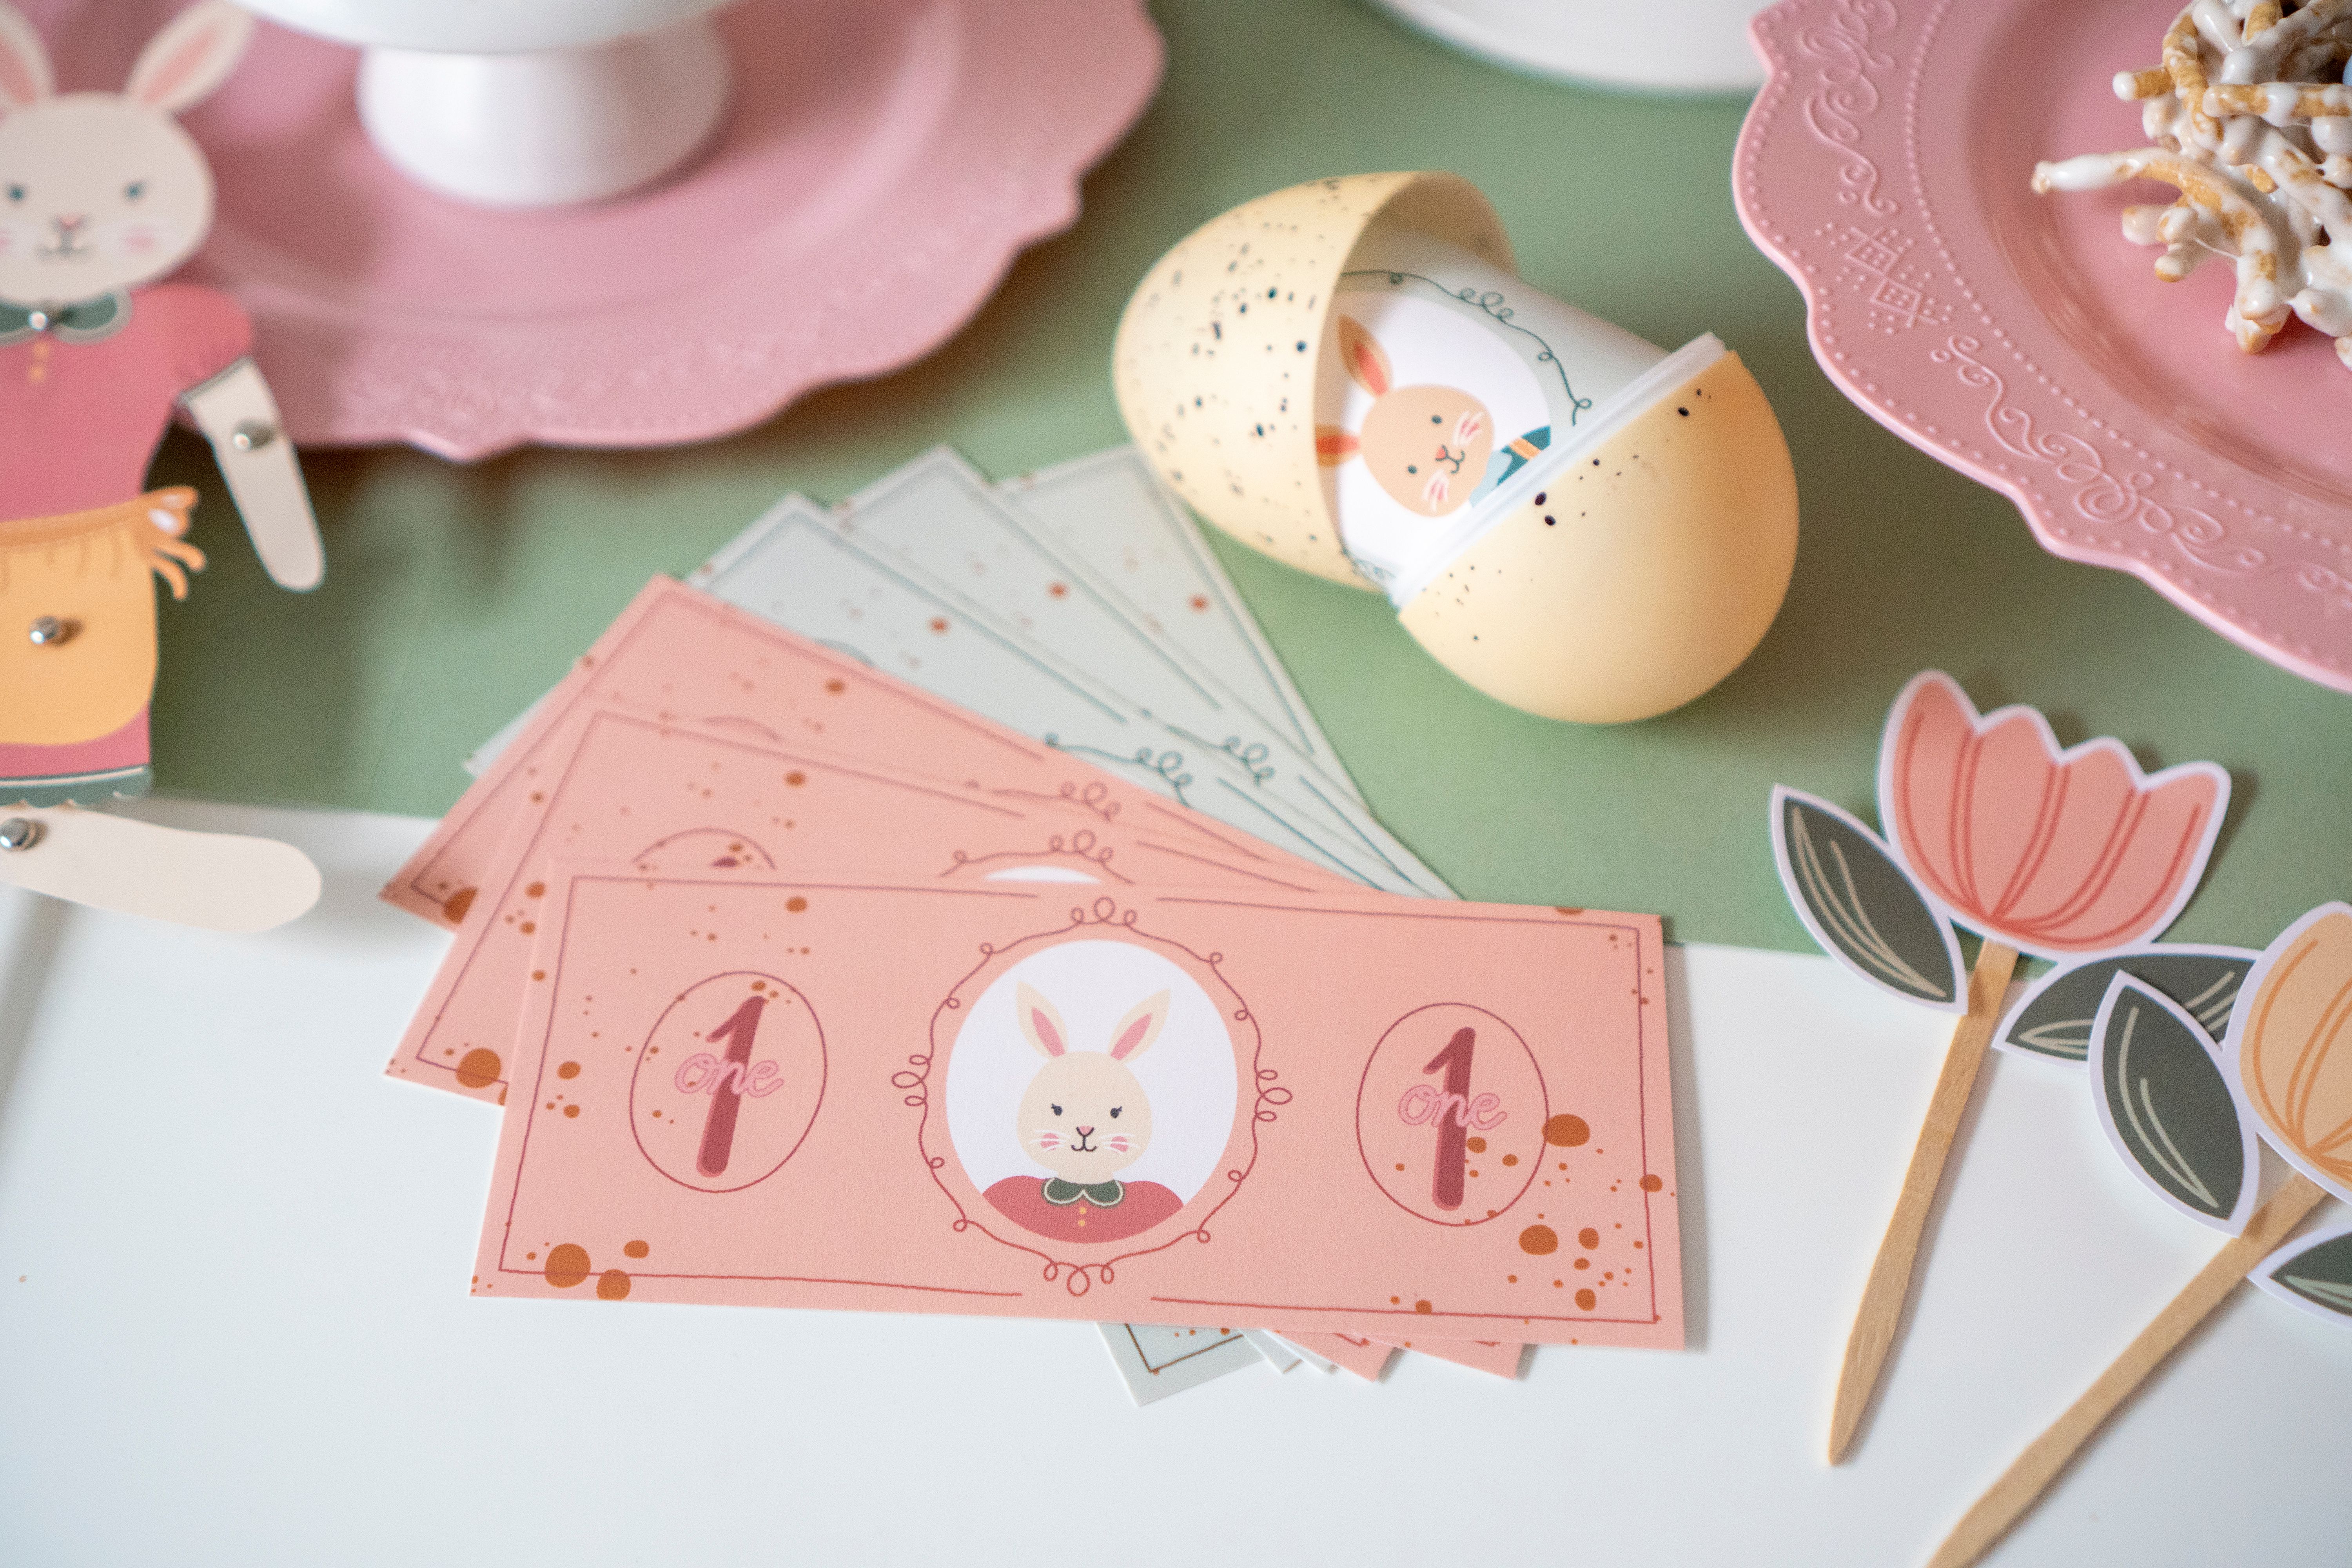 The Easter Celebration Party Pack has everything you need to host an Easter brunch or an Easter egg decorating party for kids.